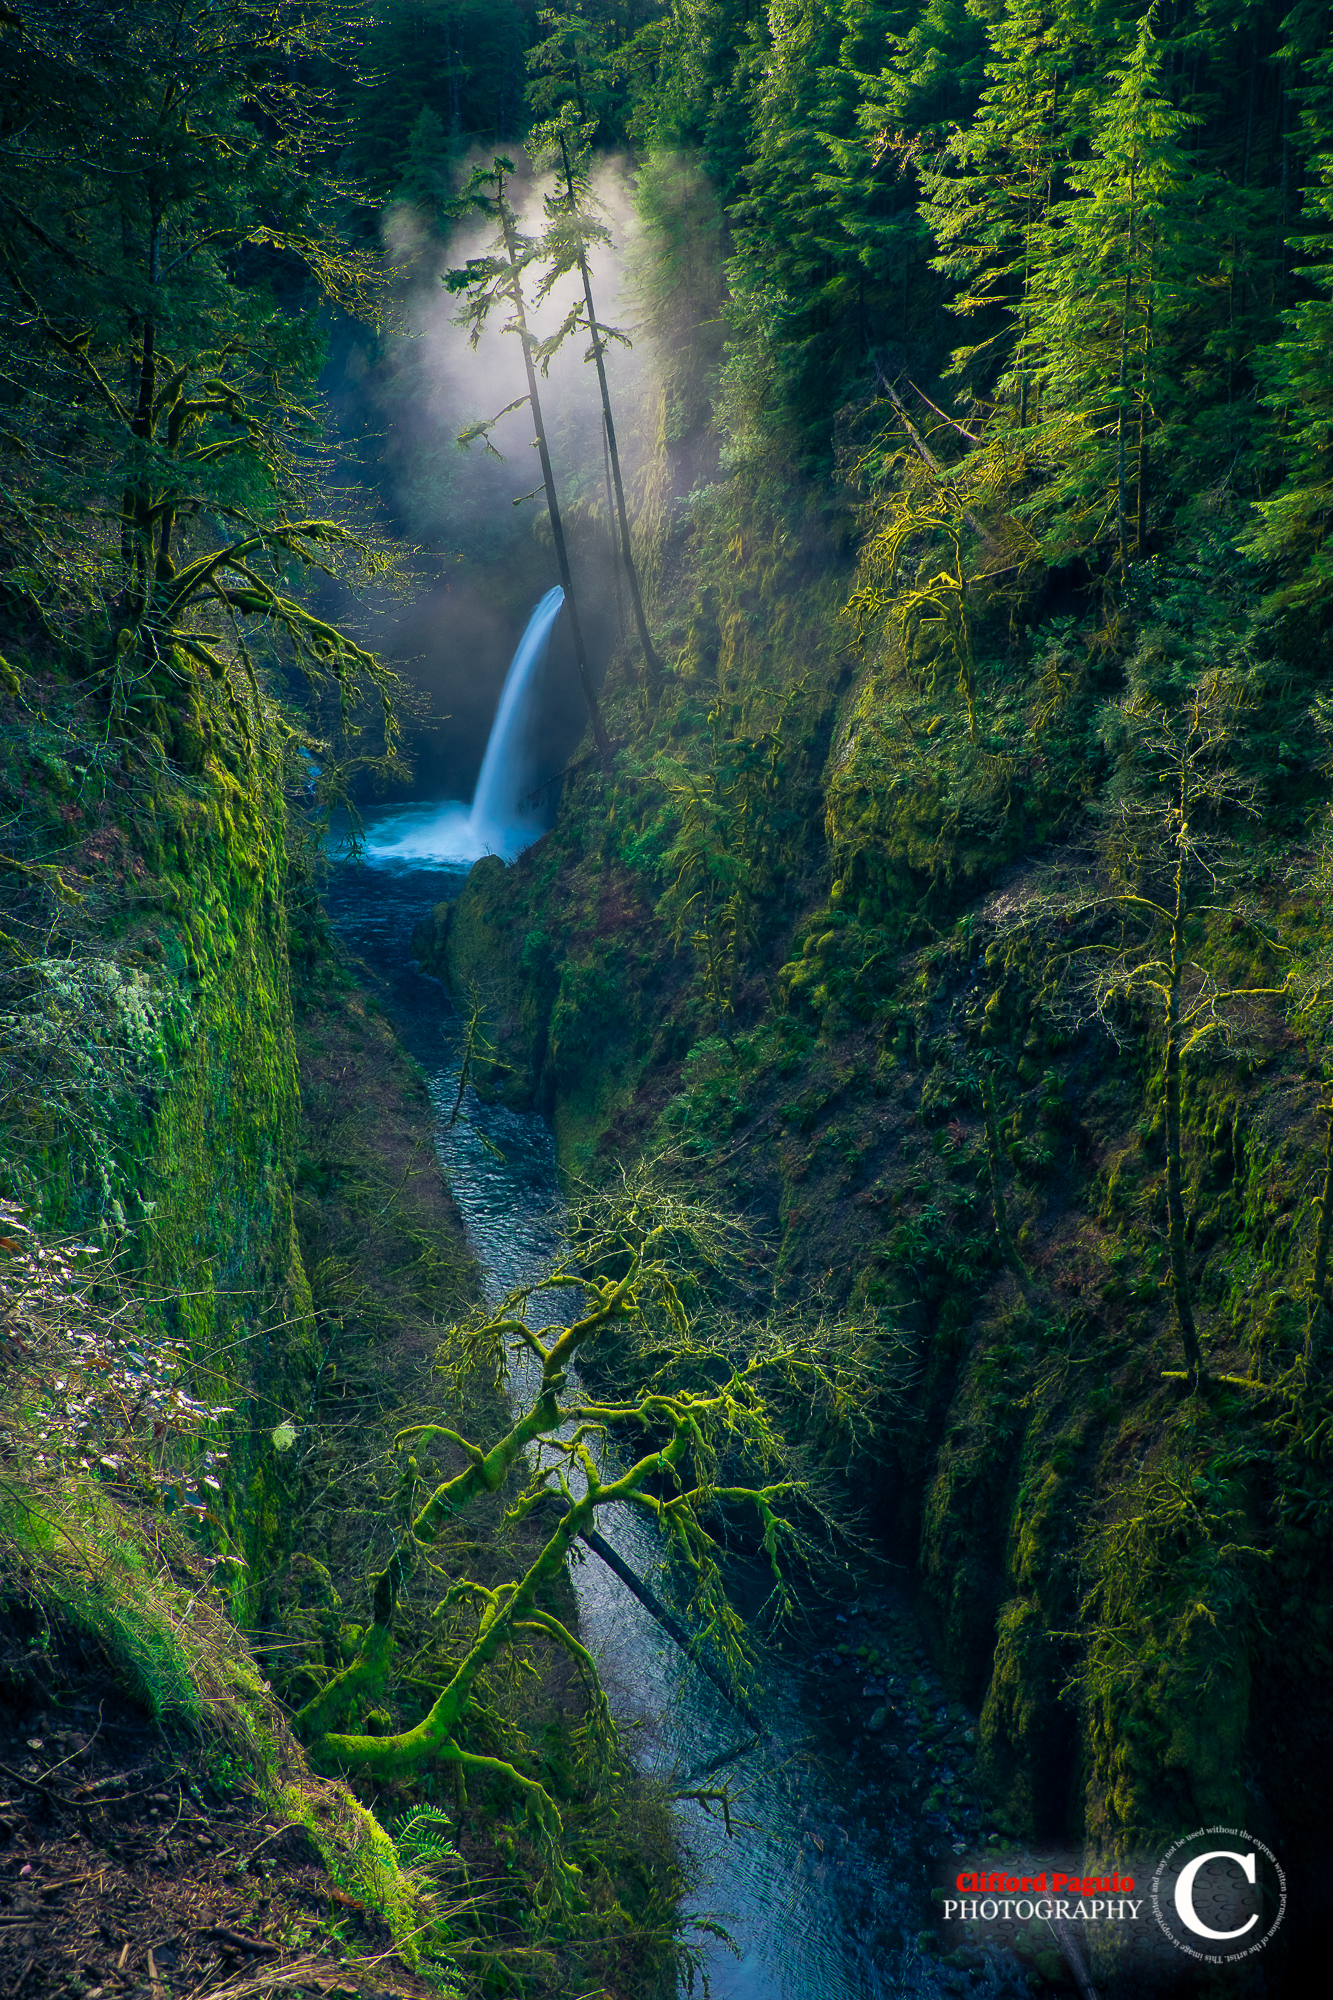 Clifford Paguio, Nature, Landscape, Water, Trees, Valley, Waterfall, Portrait display, Forest, Long exposure, Moss, Oregon, USA Wallpaper